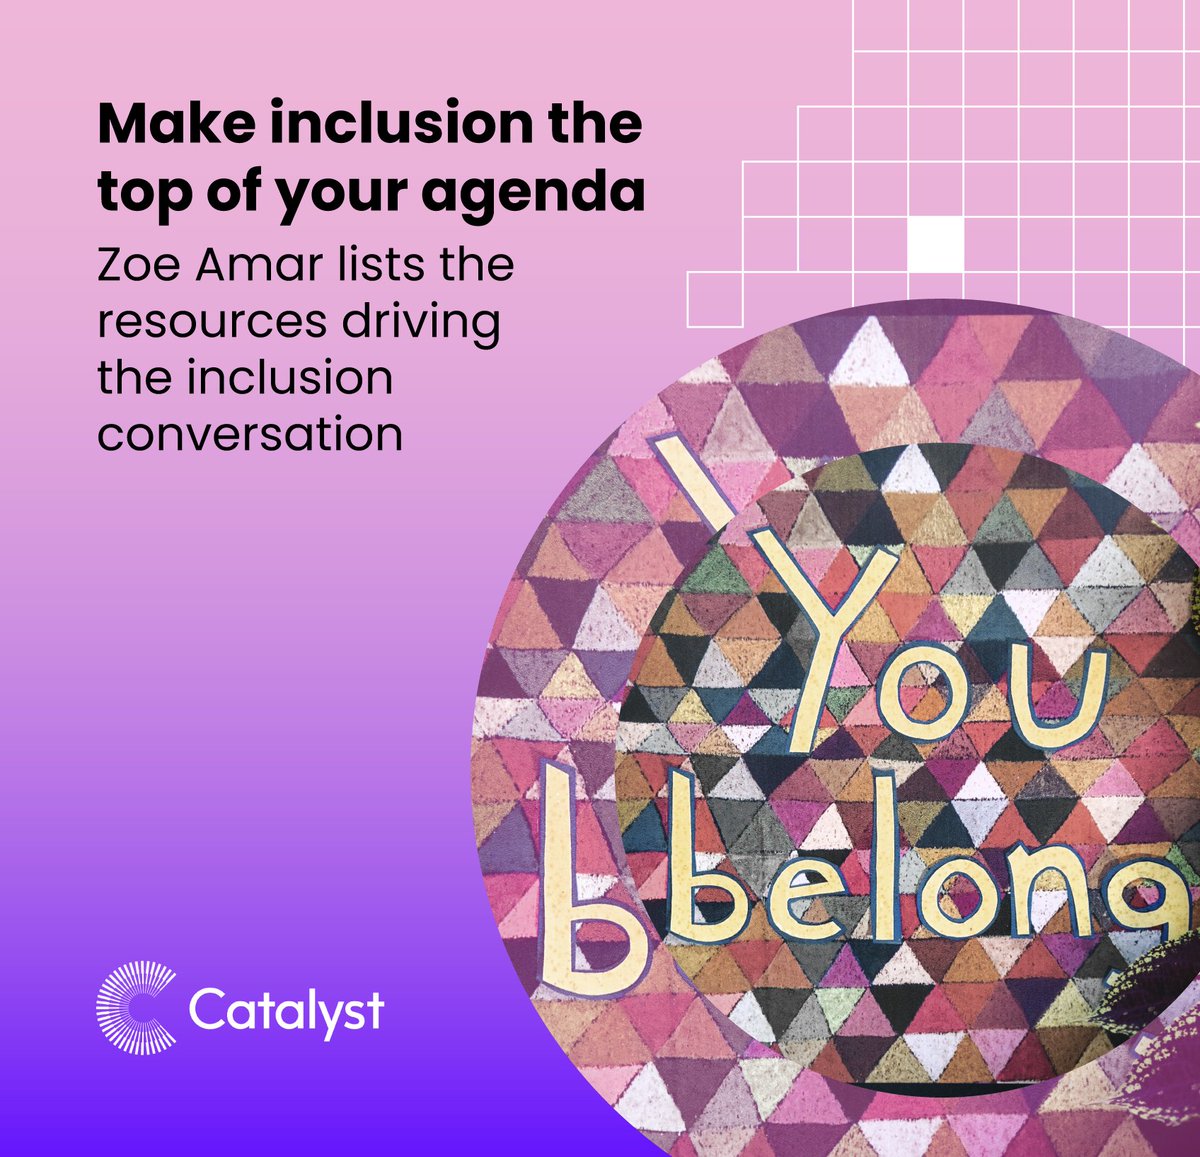 Ensure Inclusion stays top of your agenda in 2023 with @zoeamar's round-up of the resources at the heart of inclusion conversations right now. bit.ly/3YSIYVV #Inclusion #Resources #Diversity #Digital